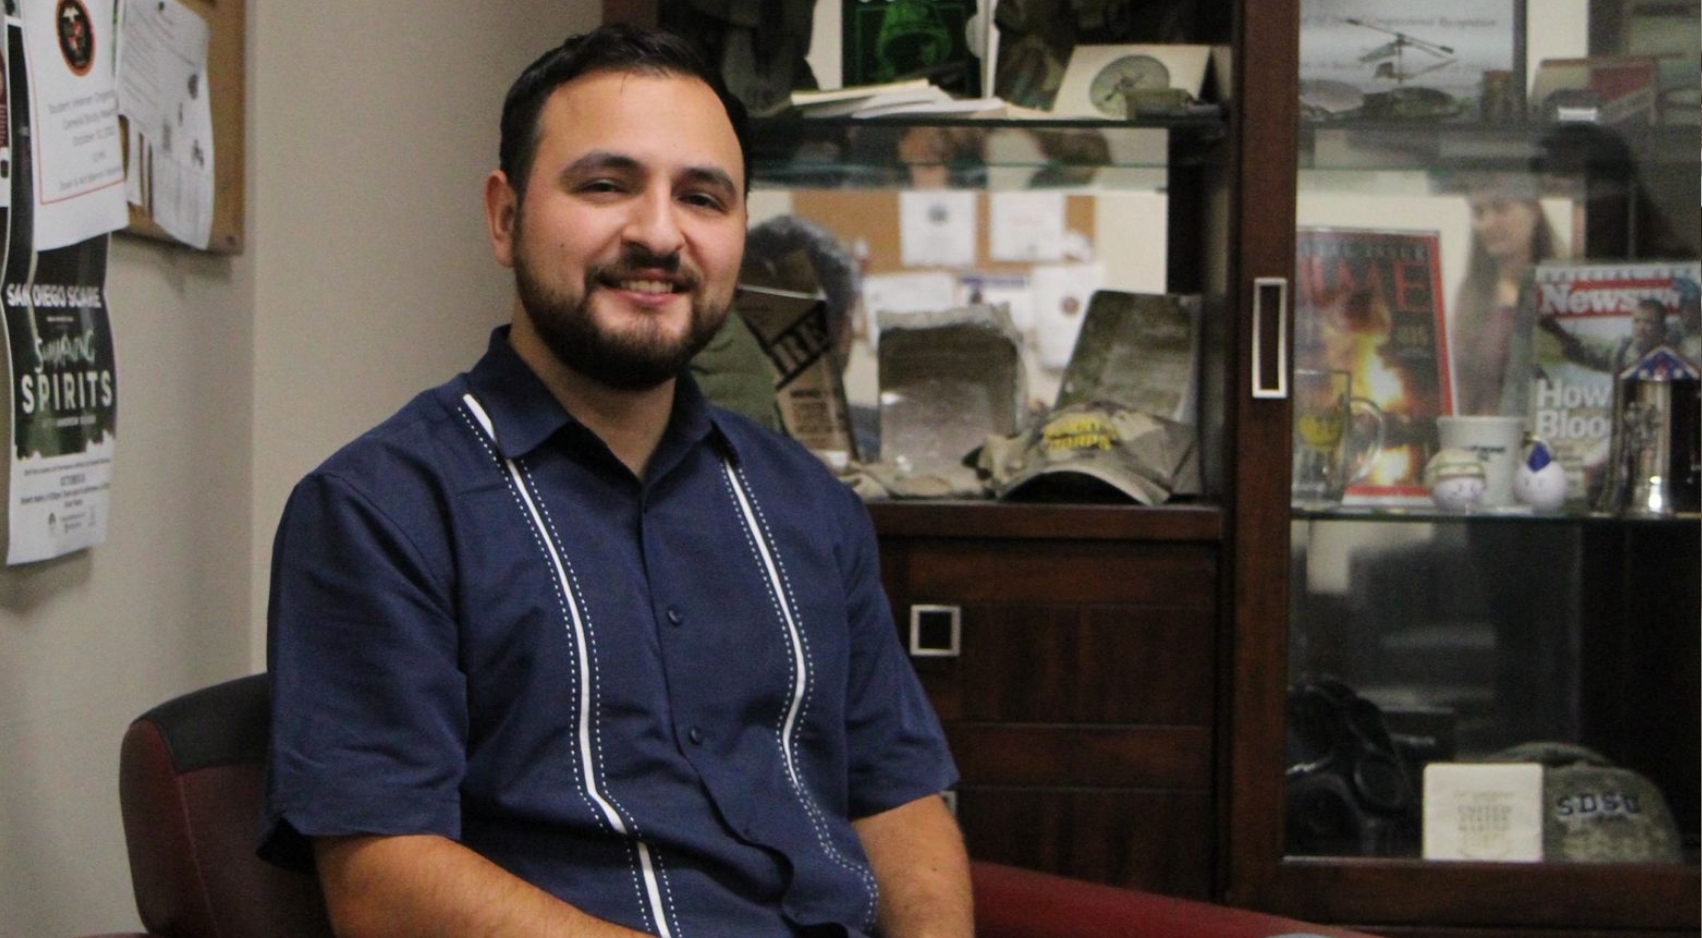 SDSU's T2E programs goal is to ease the transition to civilian learning for student veterans like Sammy Sanchez. (SDSU)